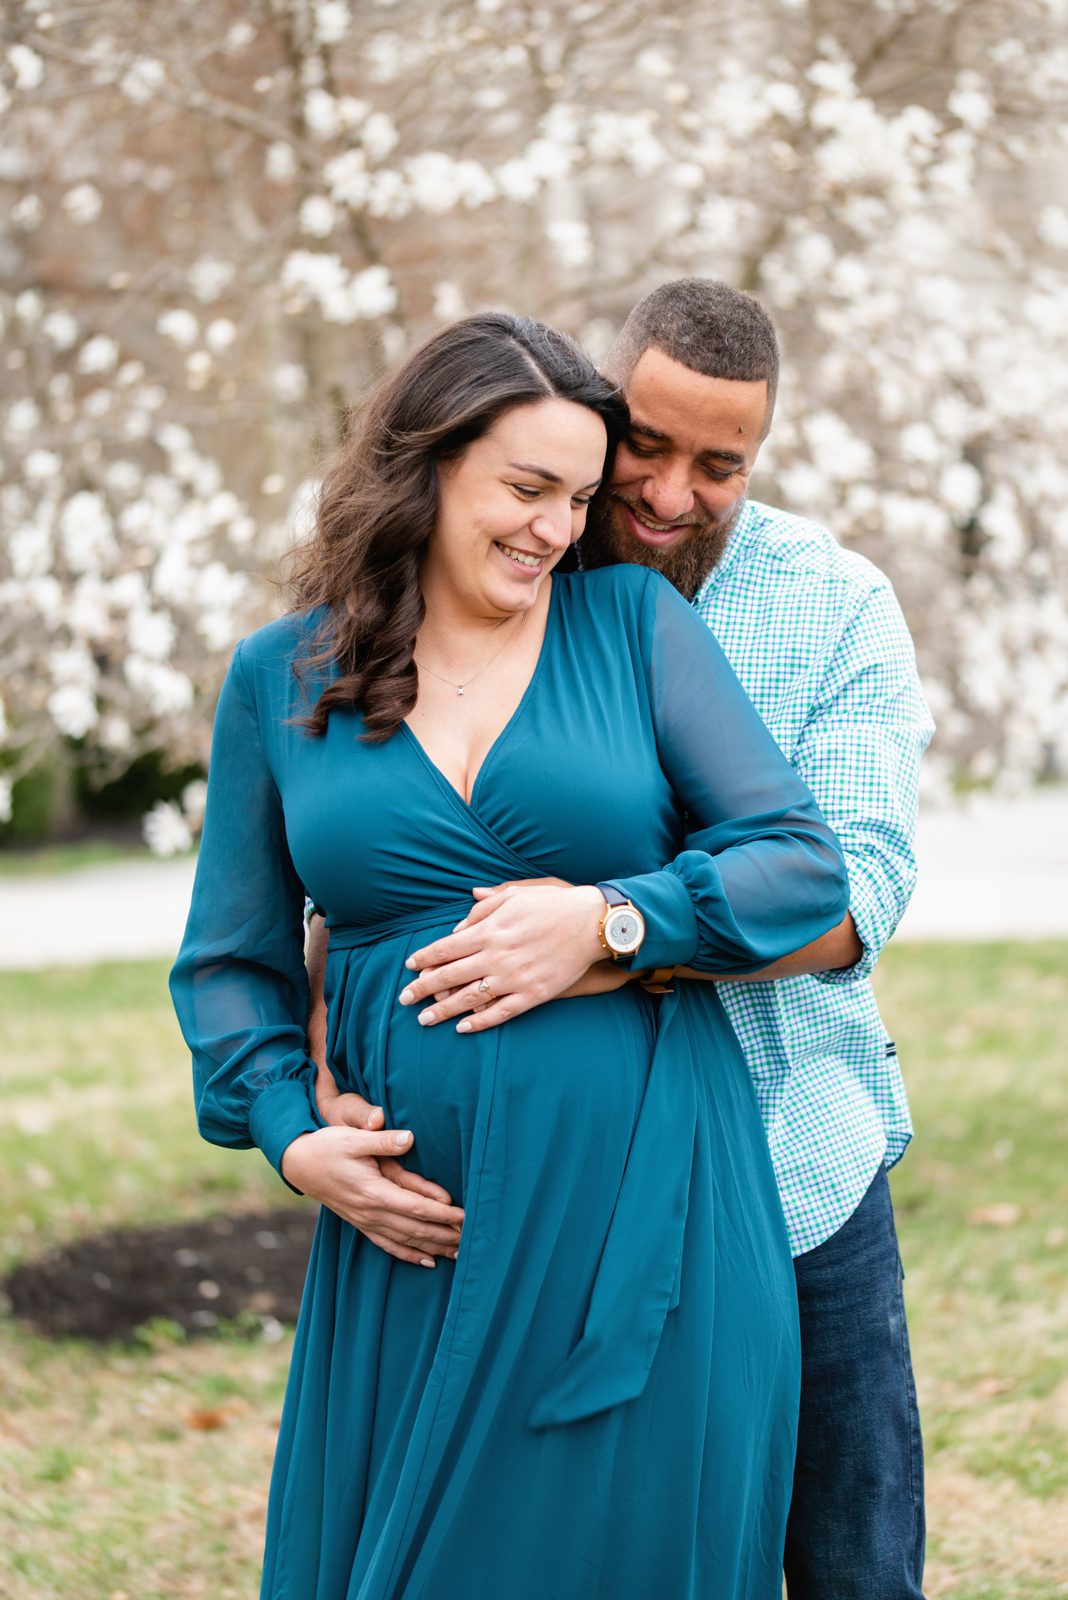 an expecting couple standing in front of a tree full of white flowers and smiling as dad hugs mom from behind during a maternity photo session